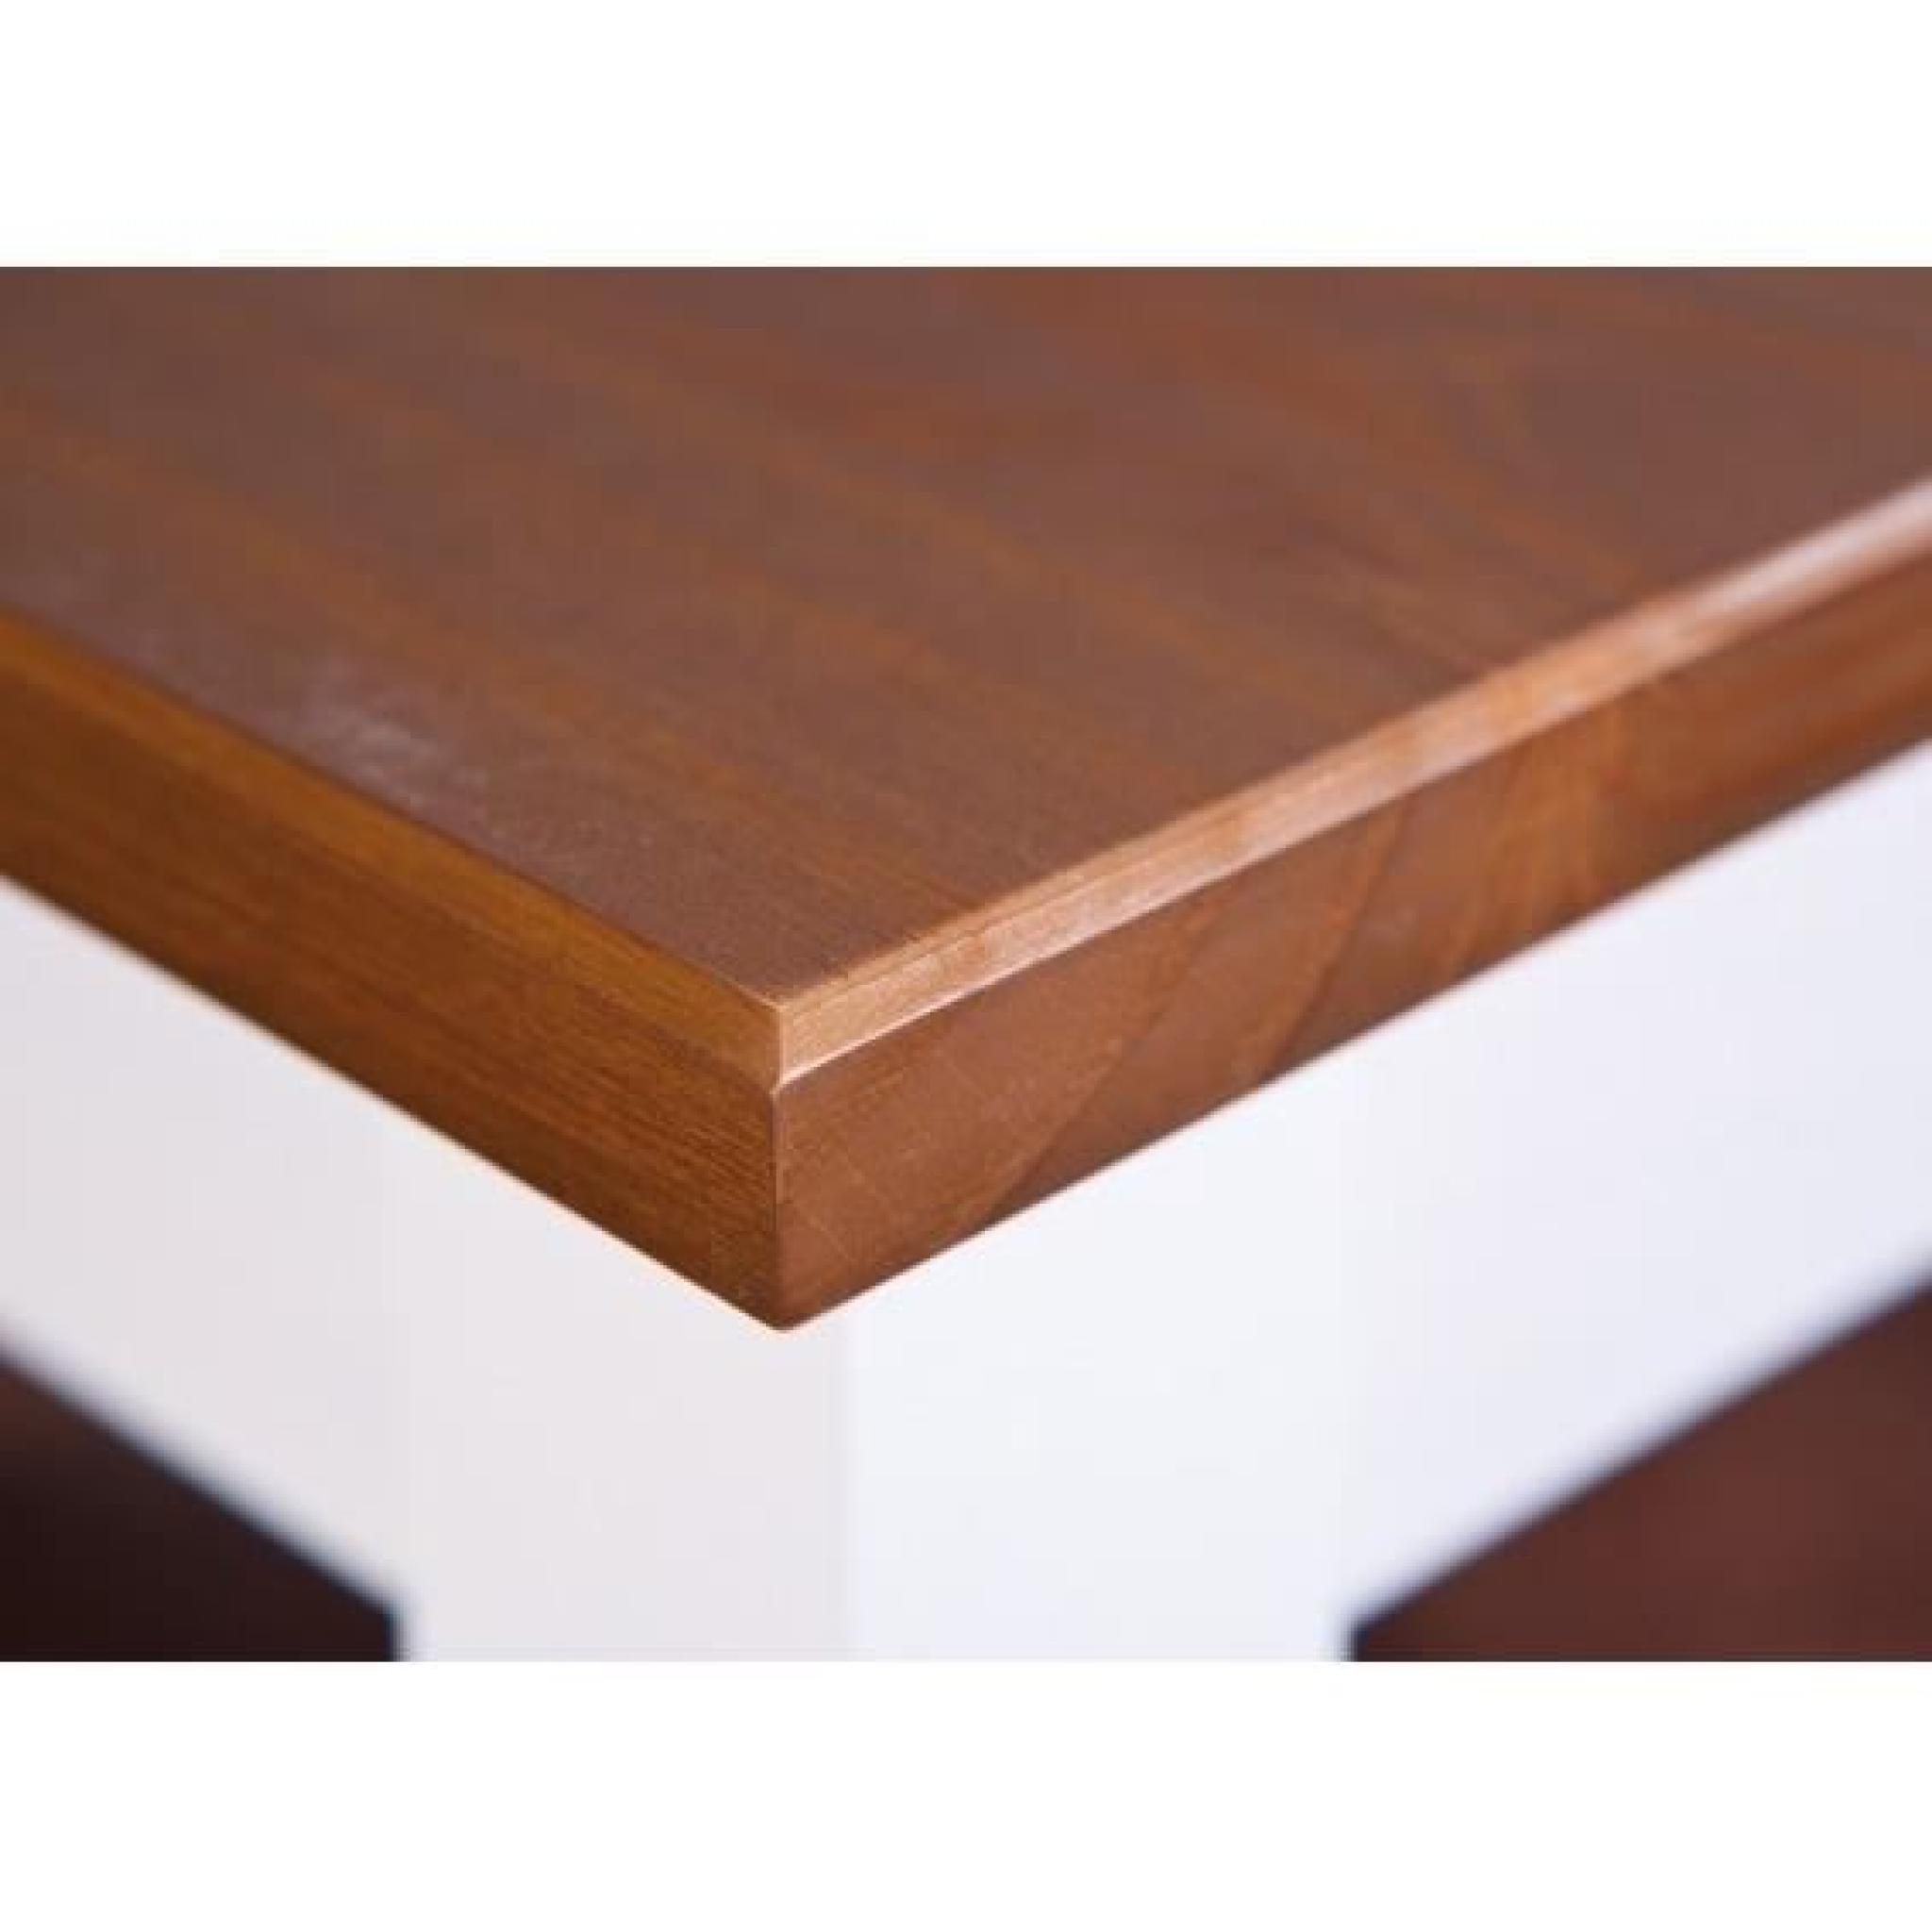 Socoa - Table Rectangulaire pas cher